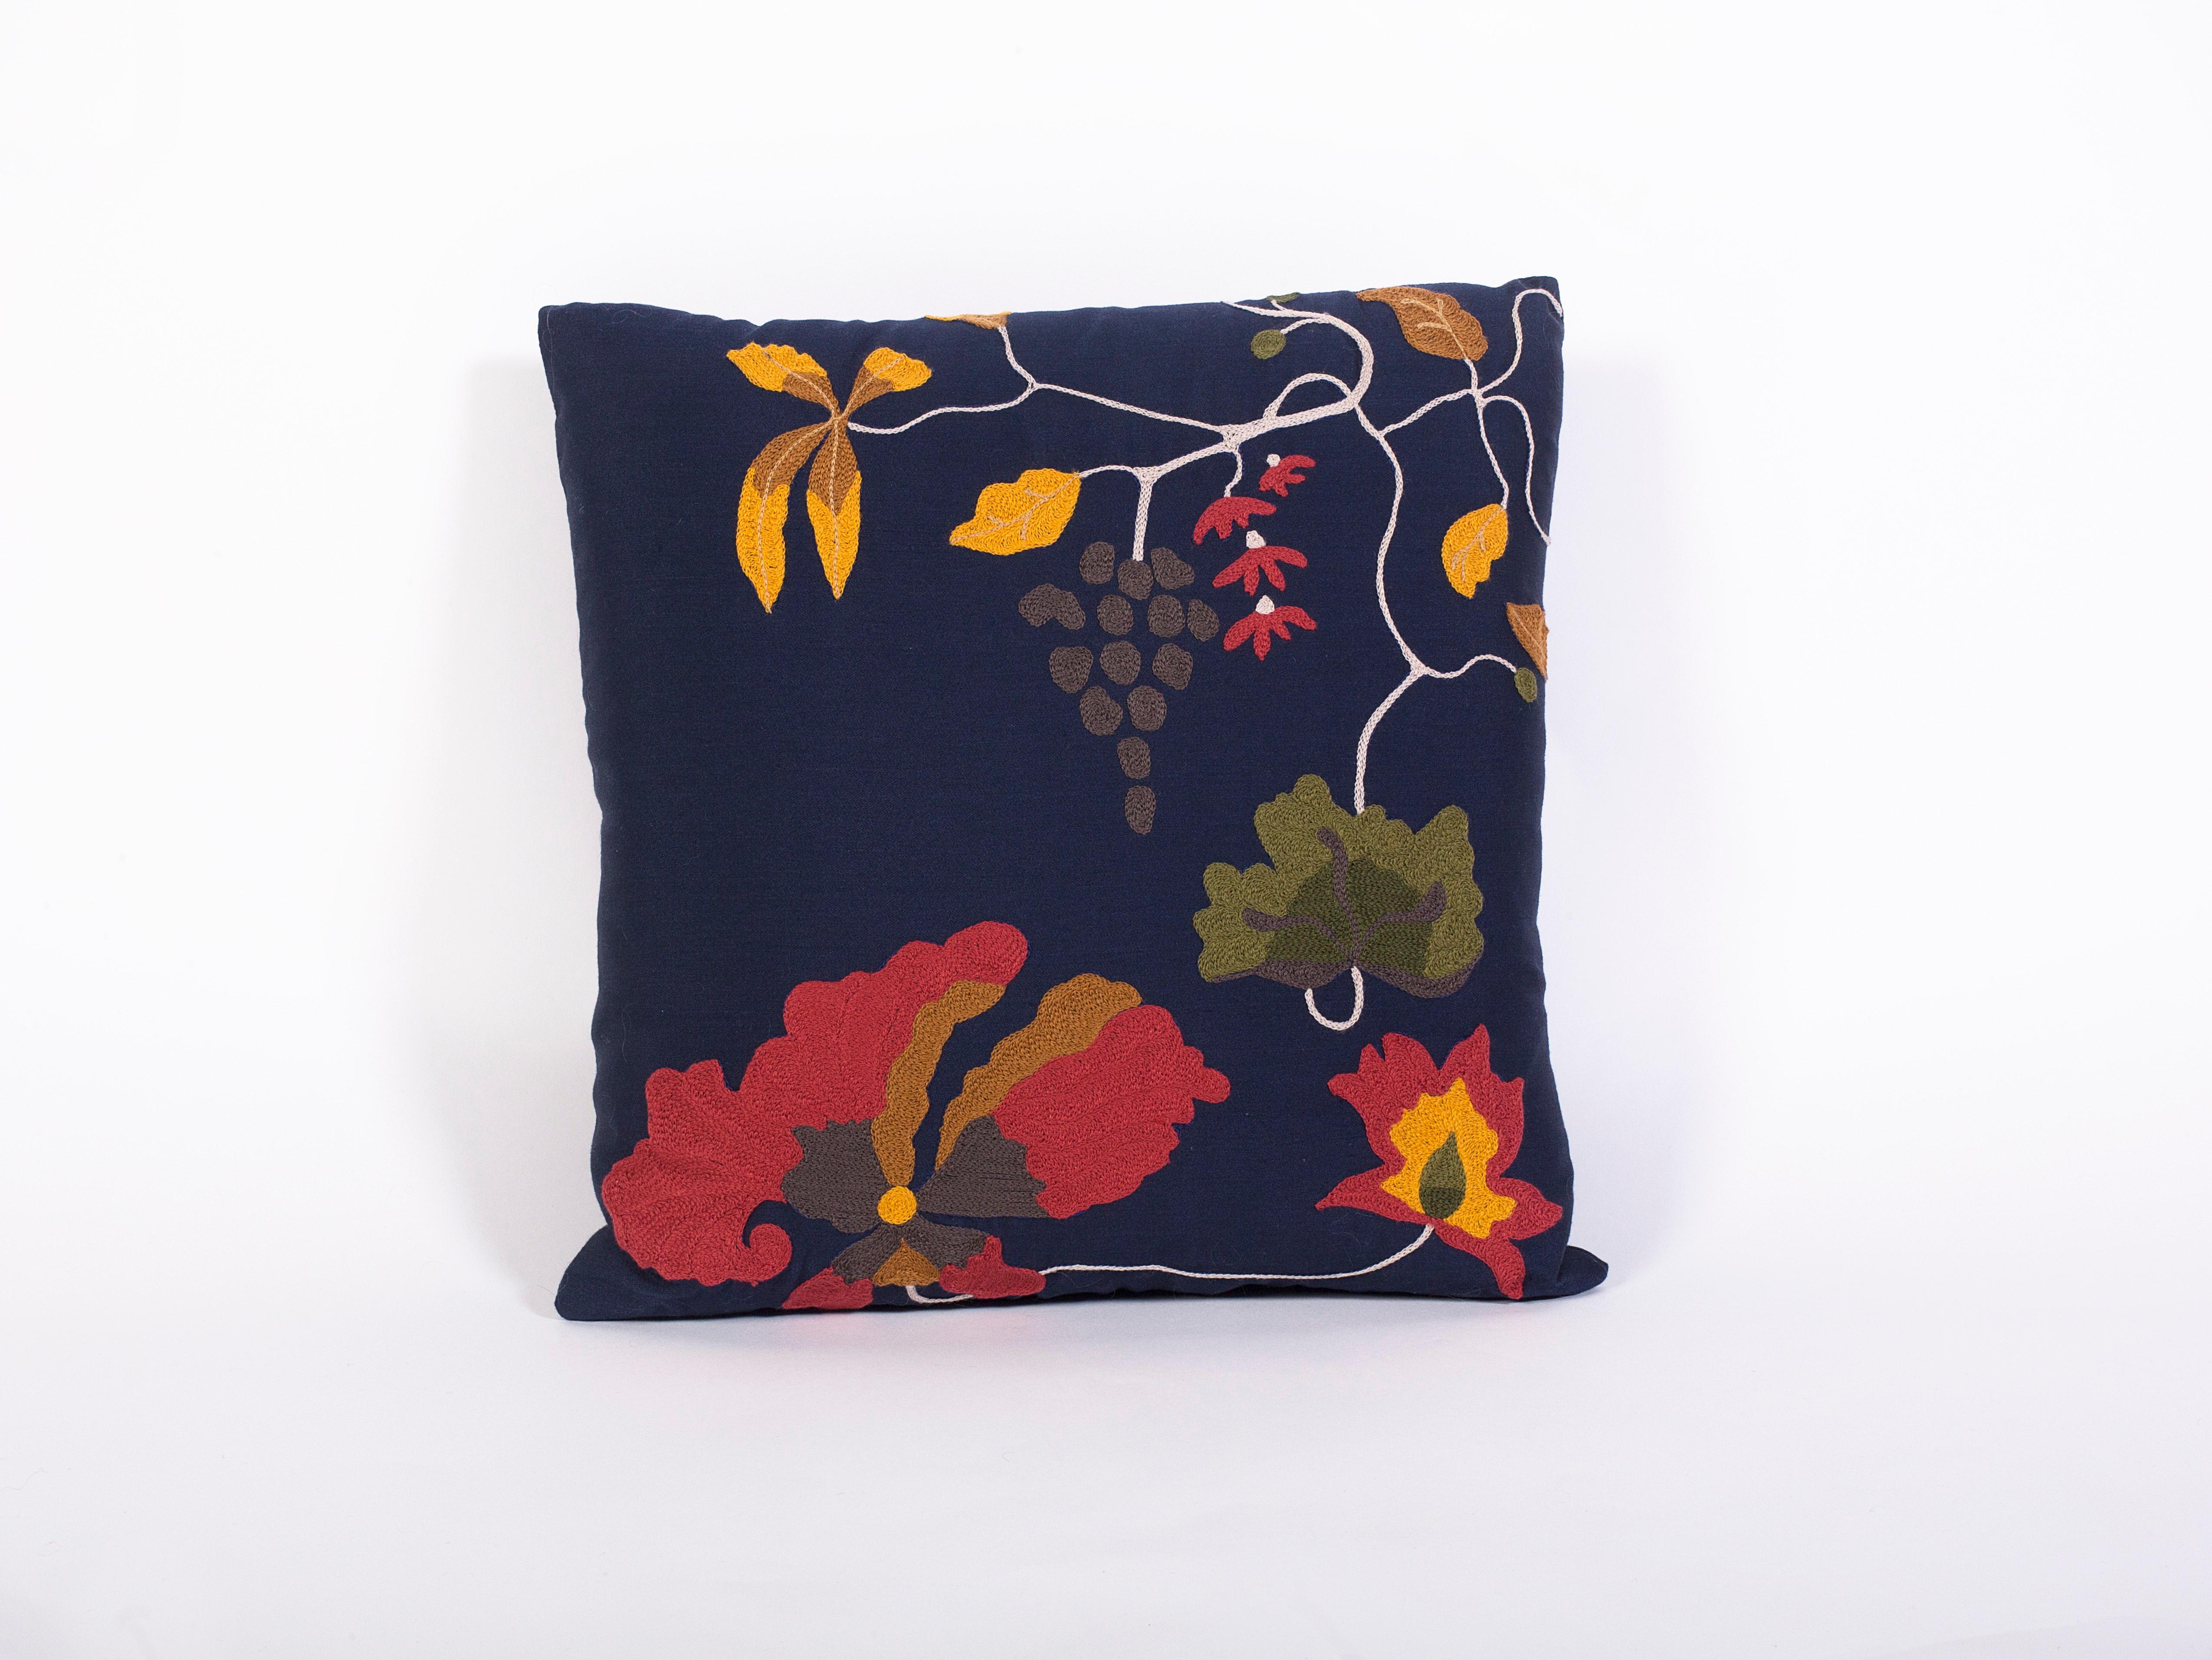 This one of a kind decorative pillow, inspired by Chinese Art Deco rugs, is embroidered with hand-steered chain stitch embroidery on luxe silk wool sateen from Dedar. Down filled. Chain stitch by artist in NYC, and pillow is hand-stitched in